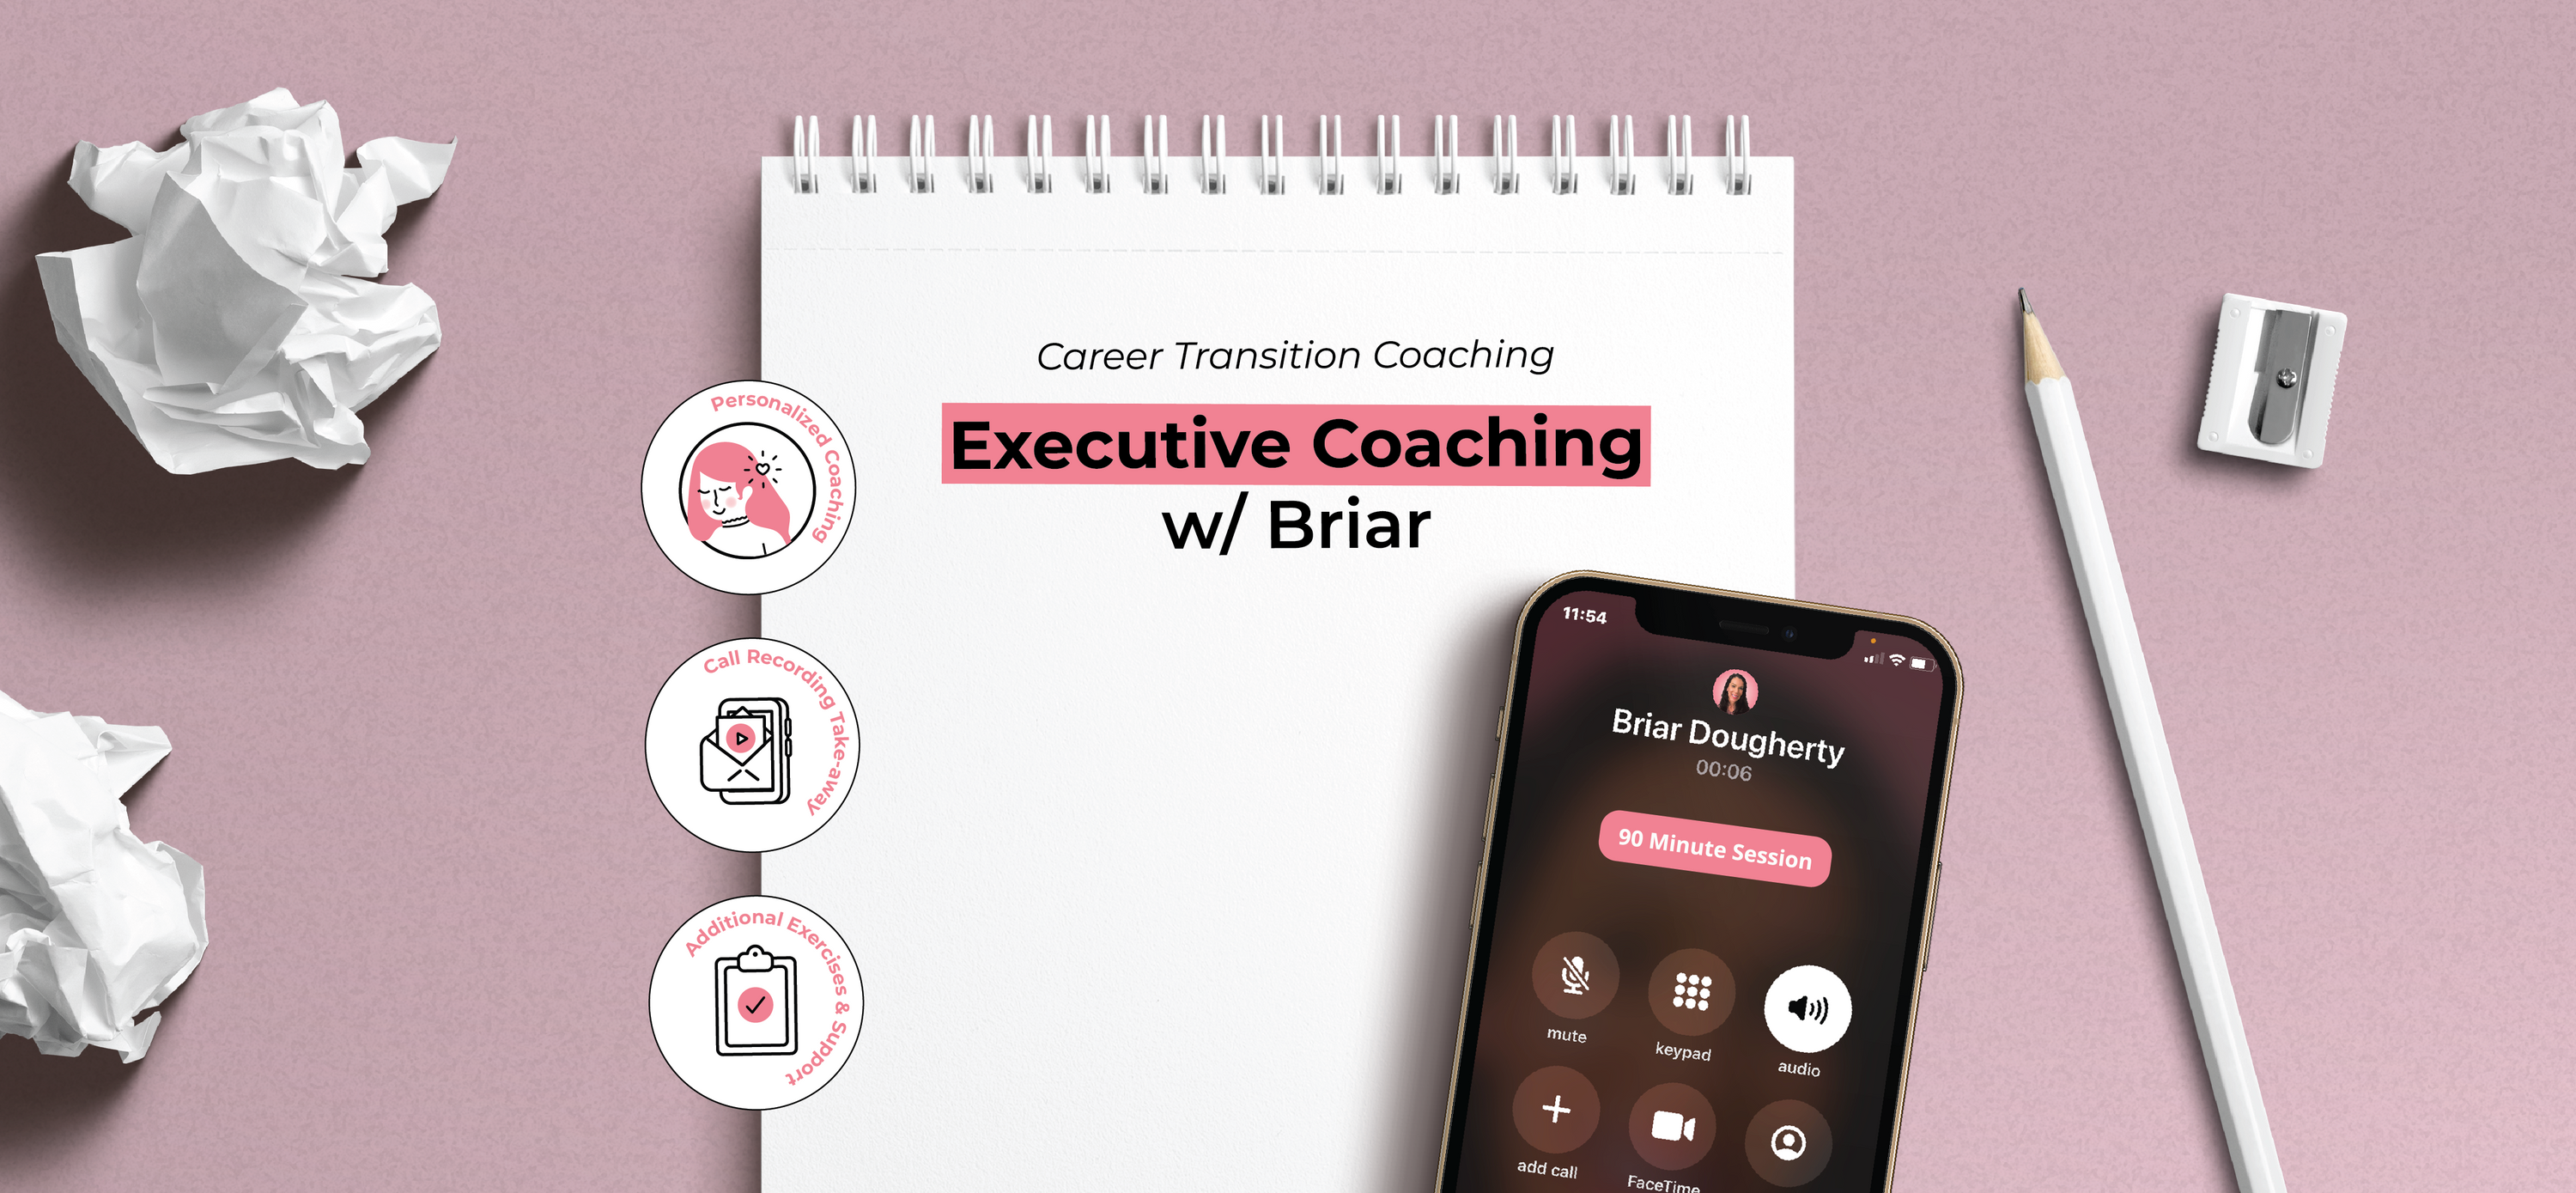 Notebook with meeting notes and a phone showing a call with our CEO Briar, representing executive coaching.